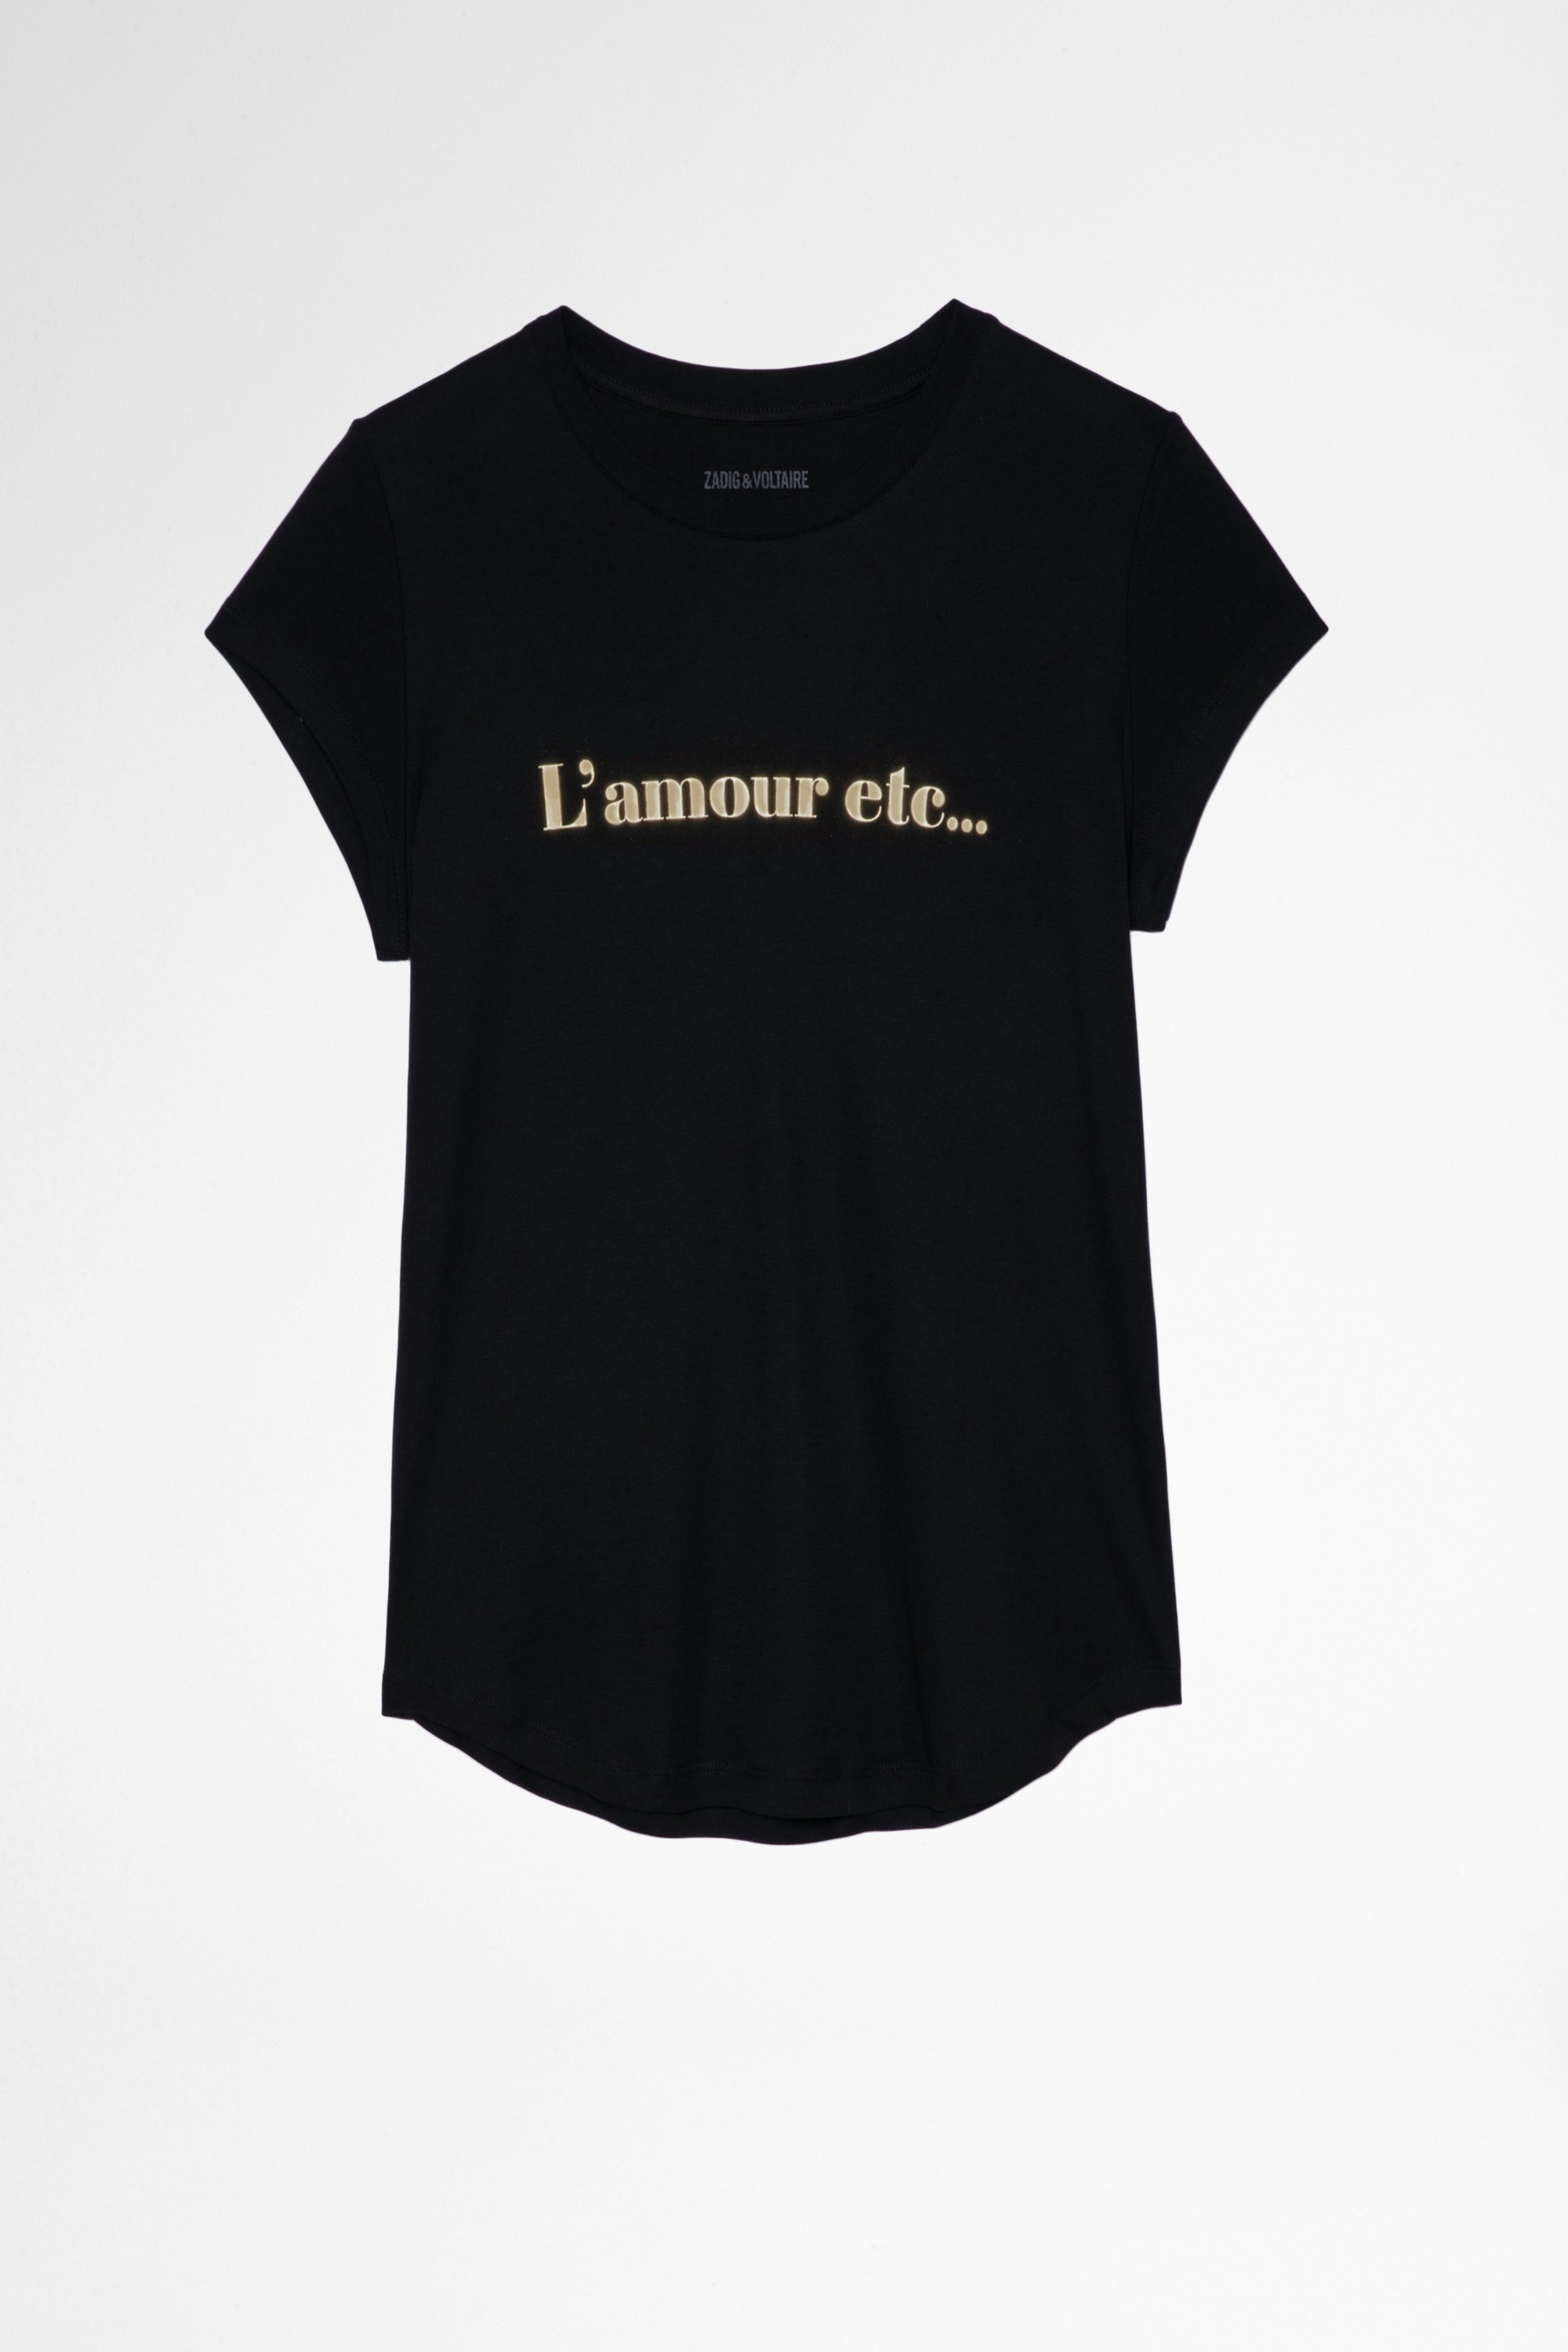 Woop L'amour etc T-shirt Women's white cotton T-shirt with Love etc print. Made with fibers from organic farming.